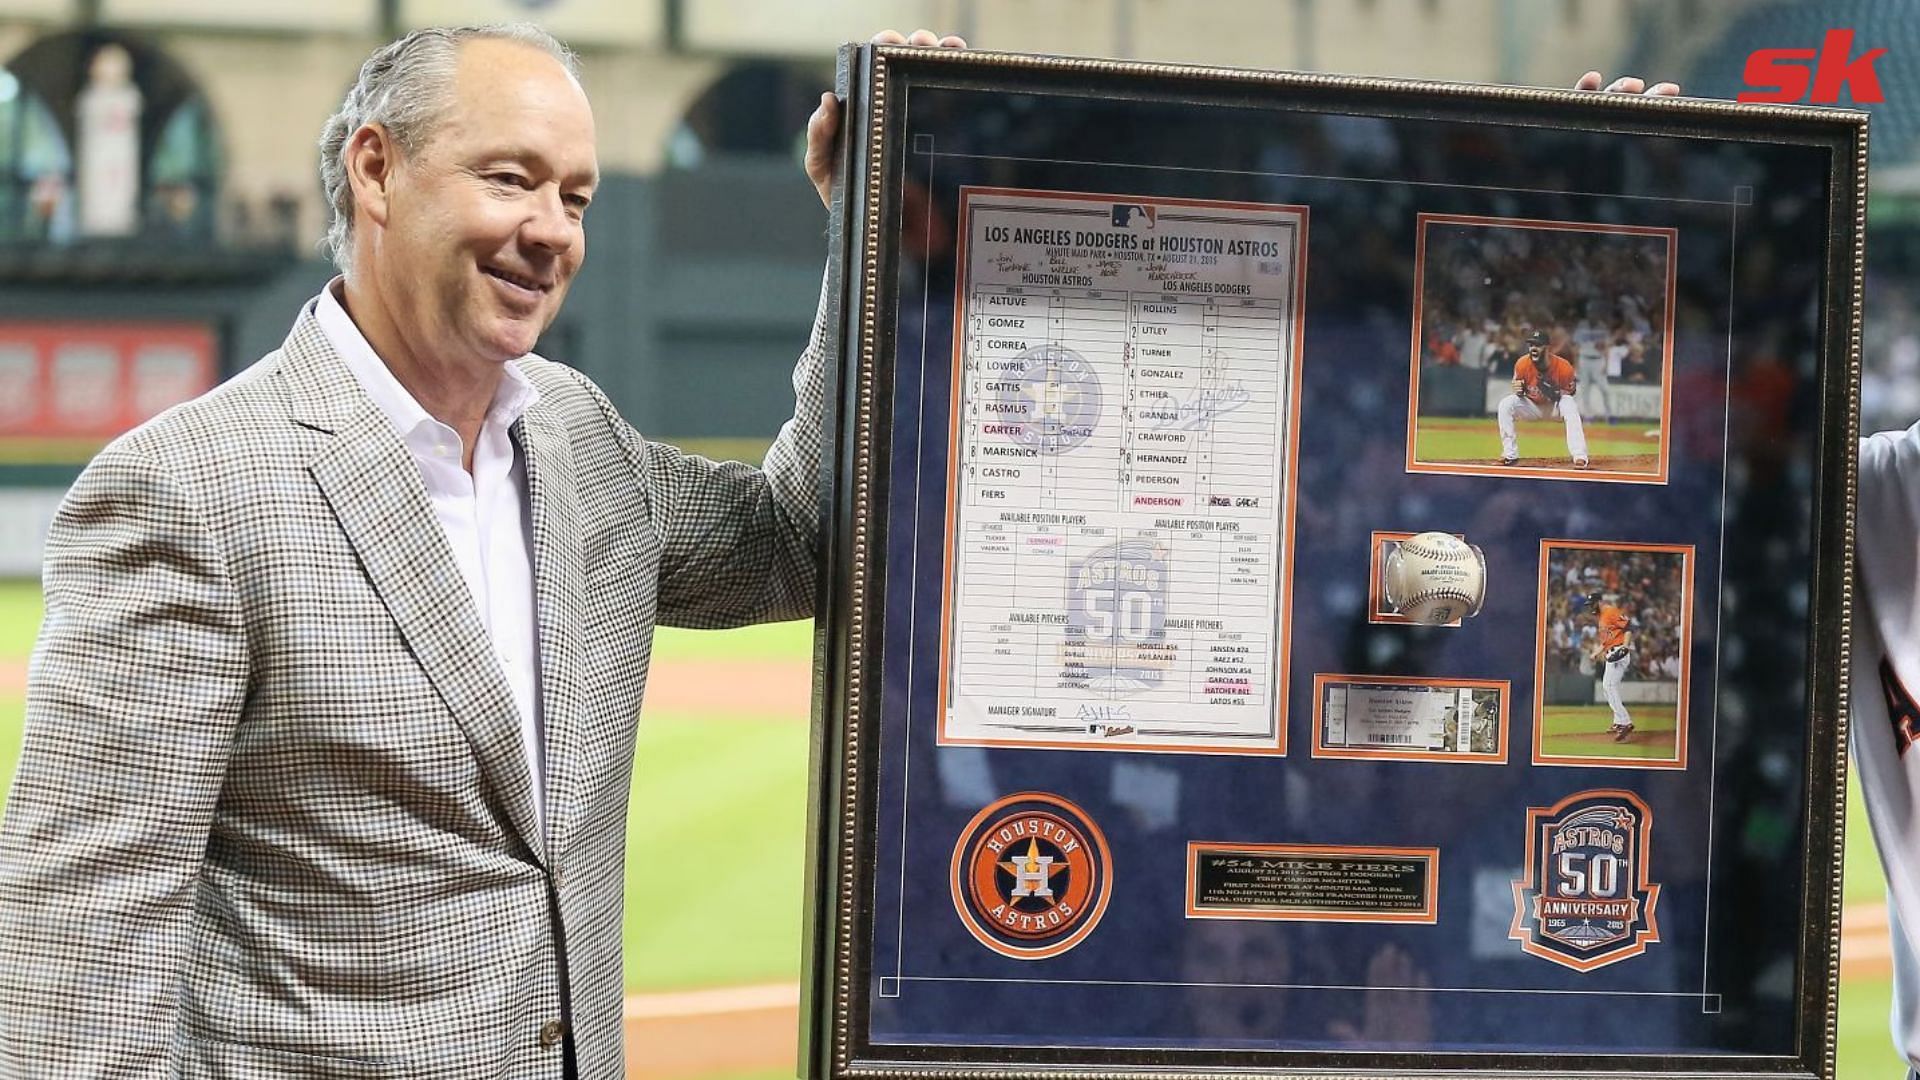 When Houston Astros owner Jim Crane escaped scot-free after an investigation cleared him of ant involvement in 2017 cheating scandal